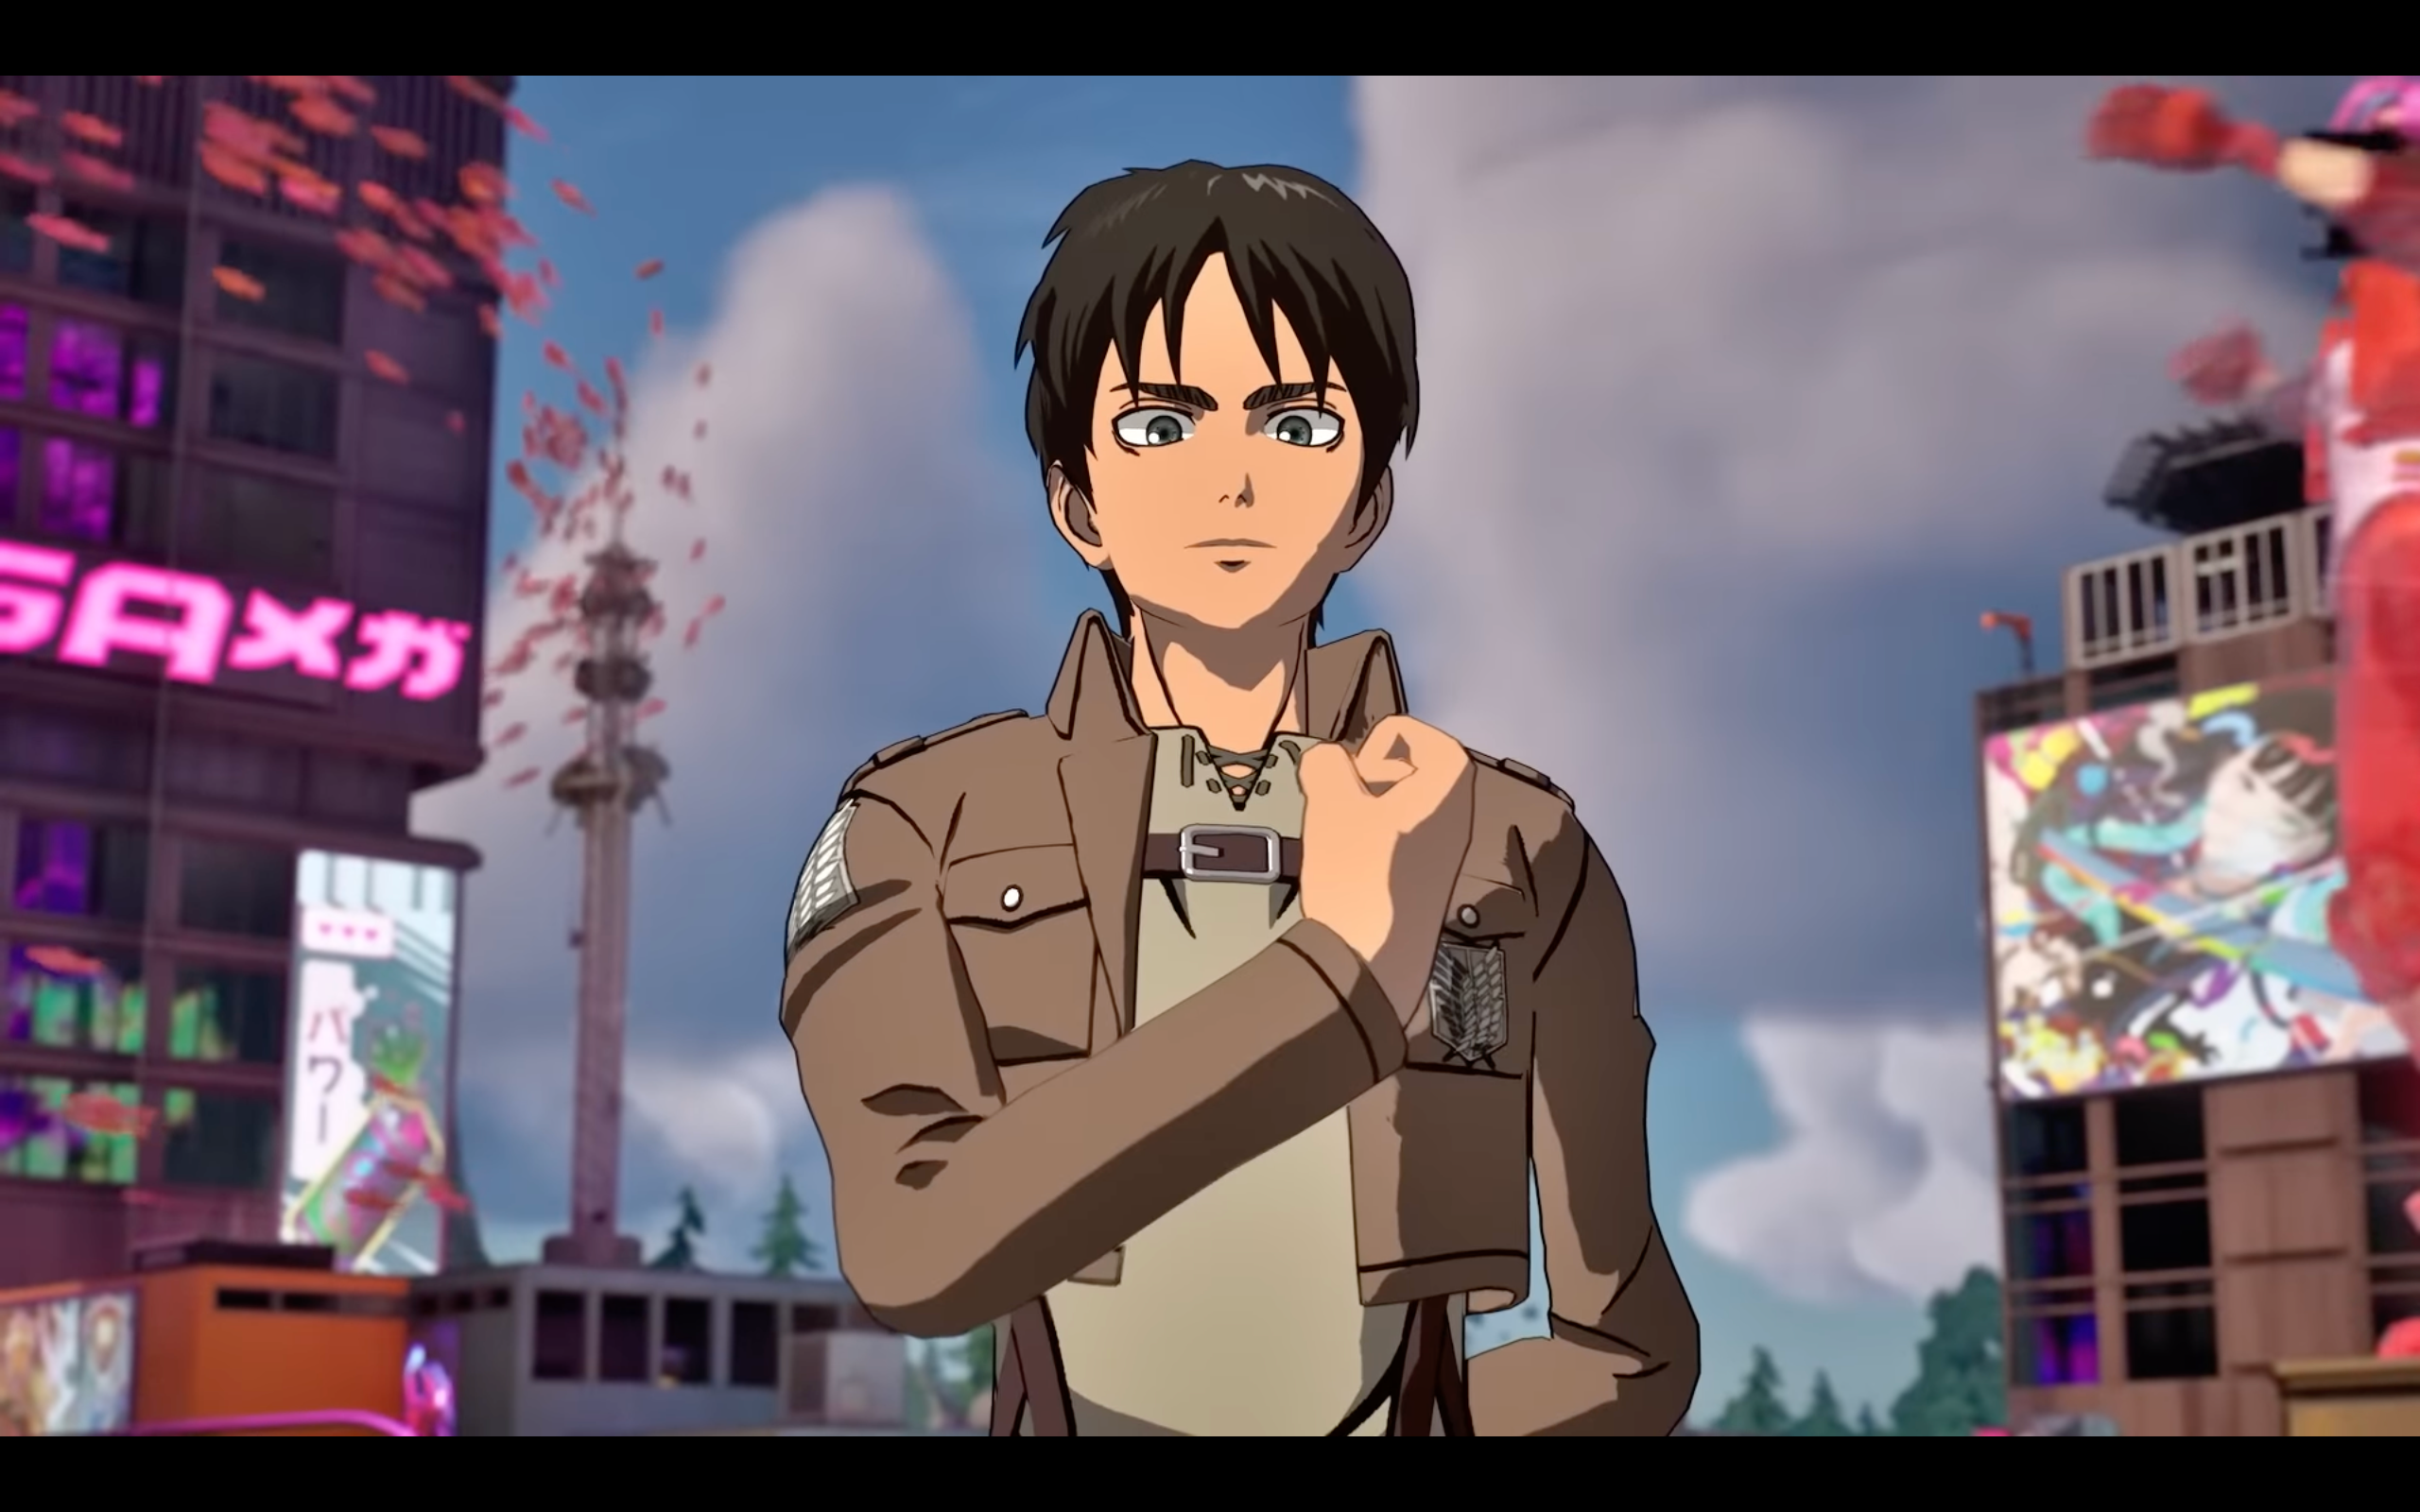 Fortnite Videos Show Attack on Titan’s Eren Yeager in Action